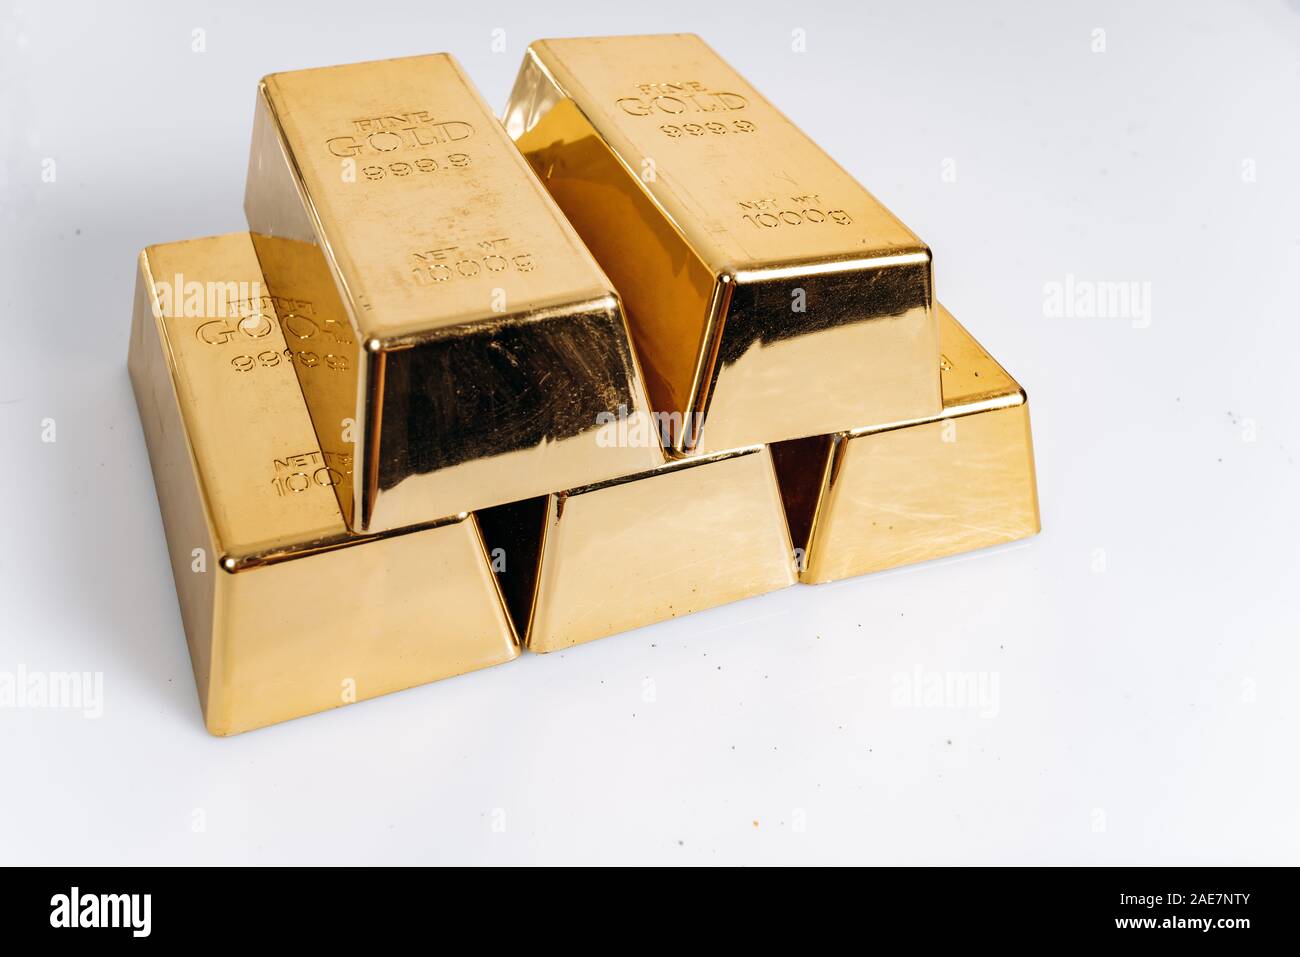 Five gold bars. Gold bars of 1 kg or 1000 grams. Gold bars are on the Stock Photo Alamy